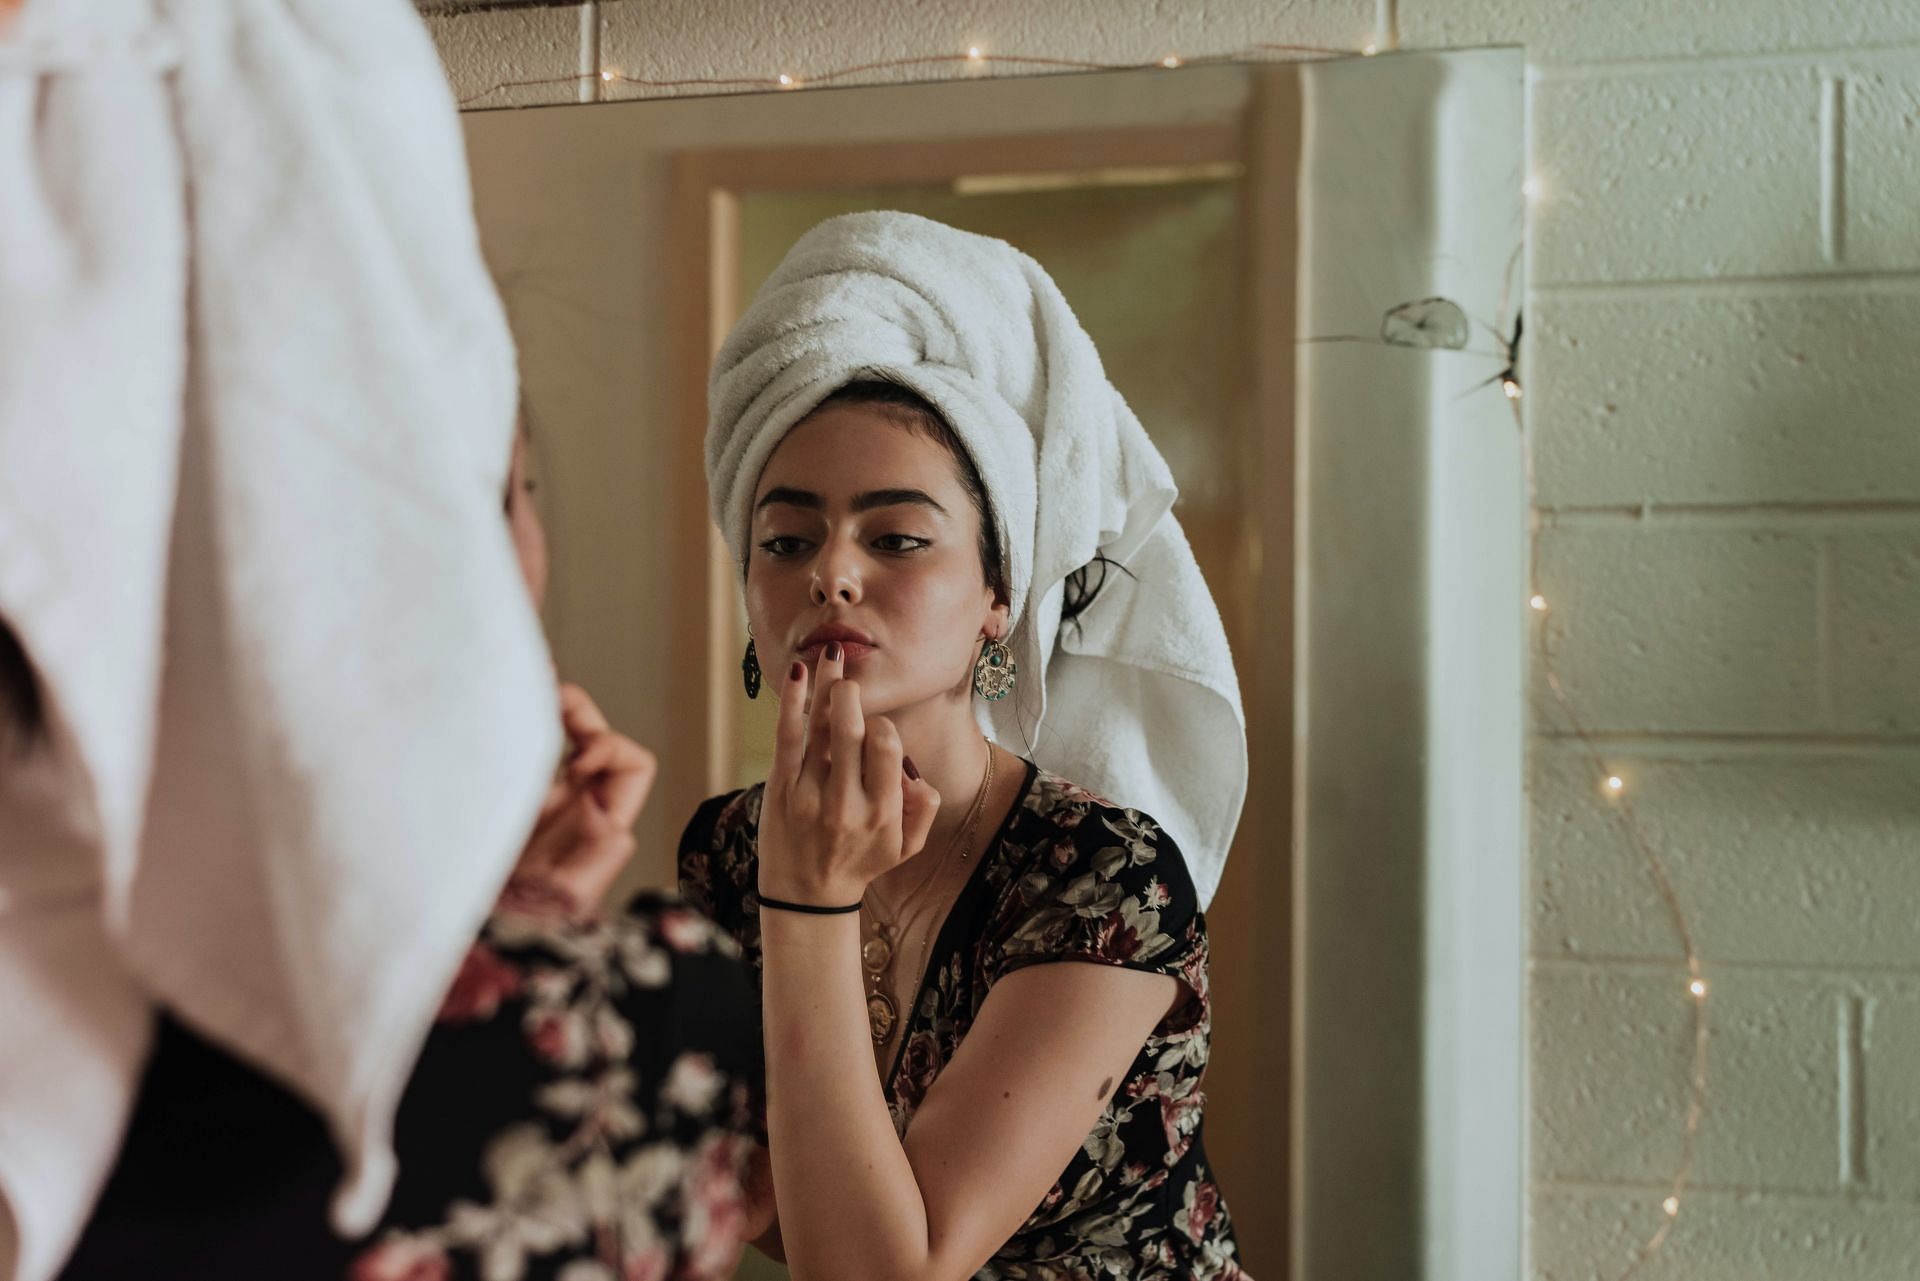 Give your skin the attention it deserves! (Image via unsplash/Kevin Laminto)